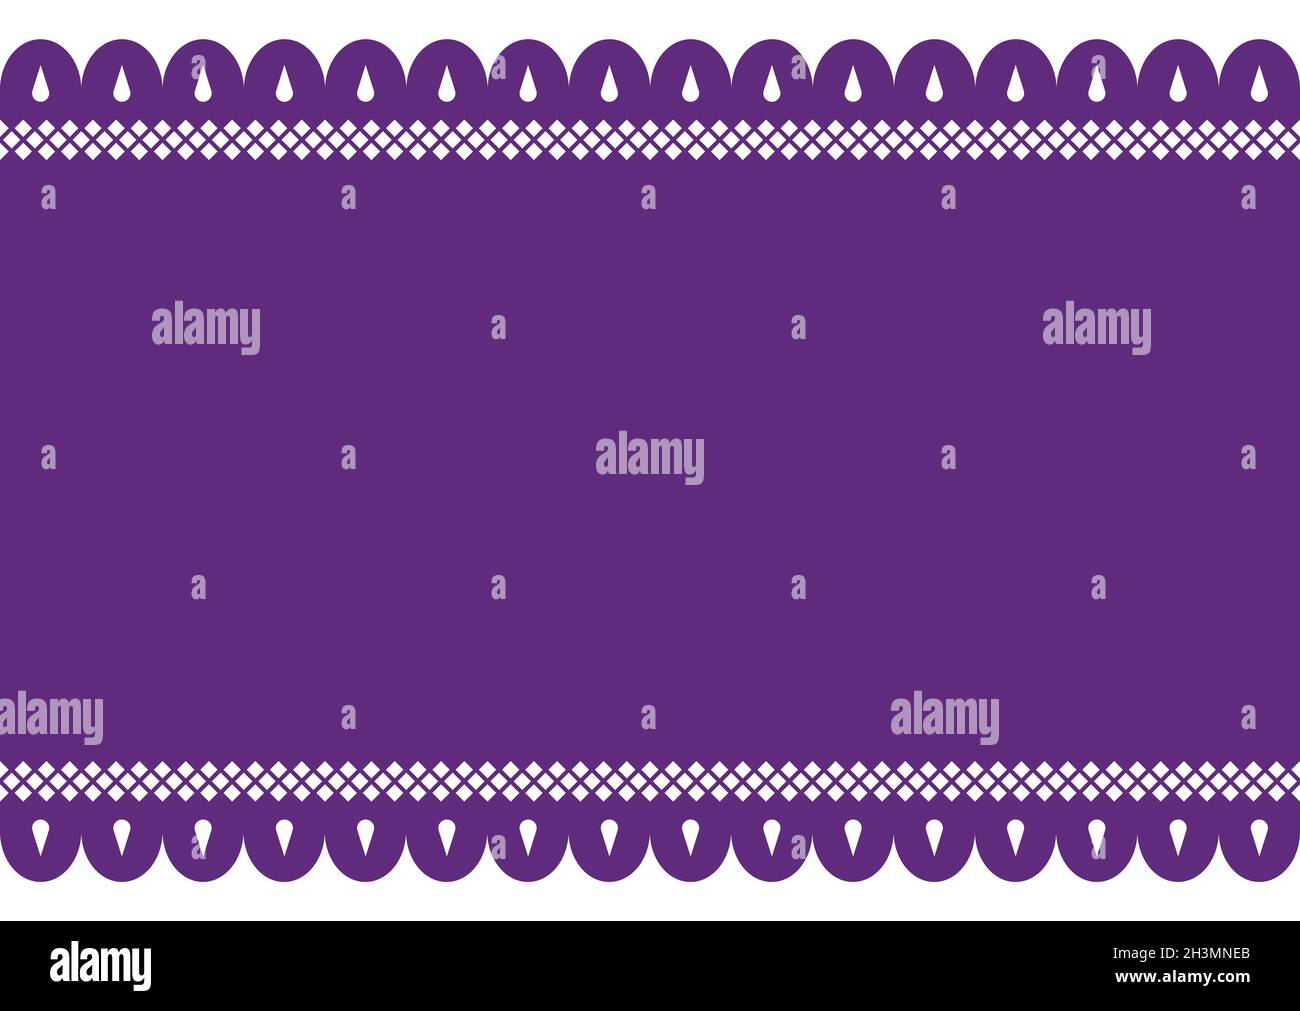 Horizontal template of purple perforated paper or 'papel picado' for Mexican traditions. Stock Vector